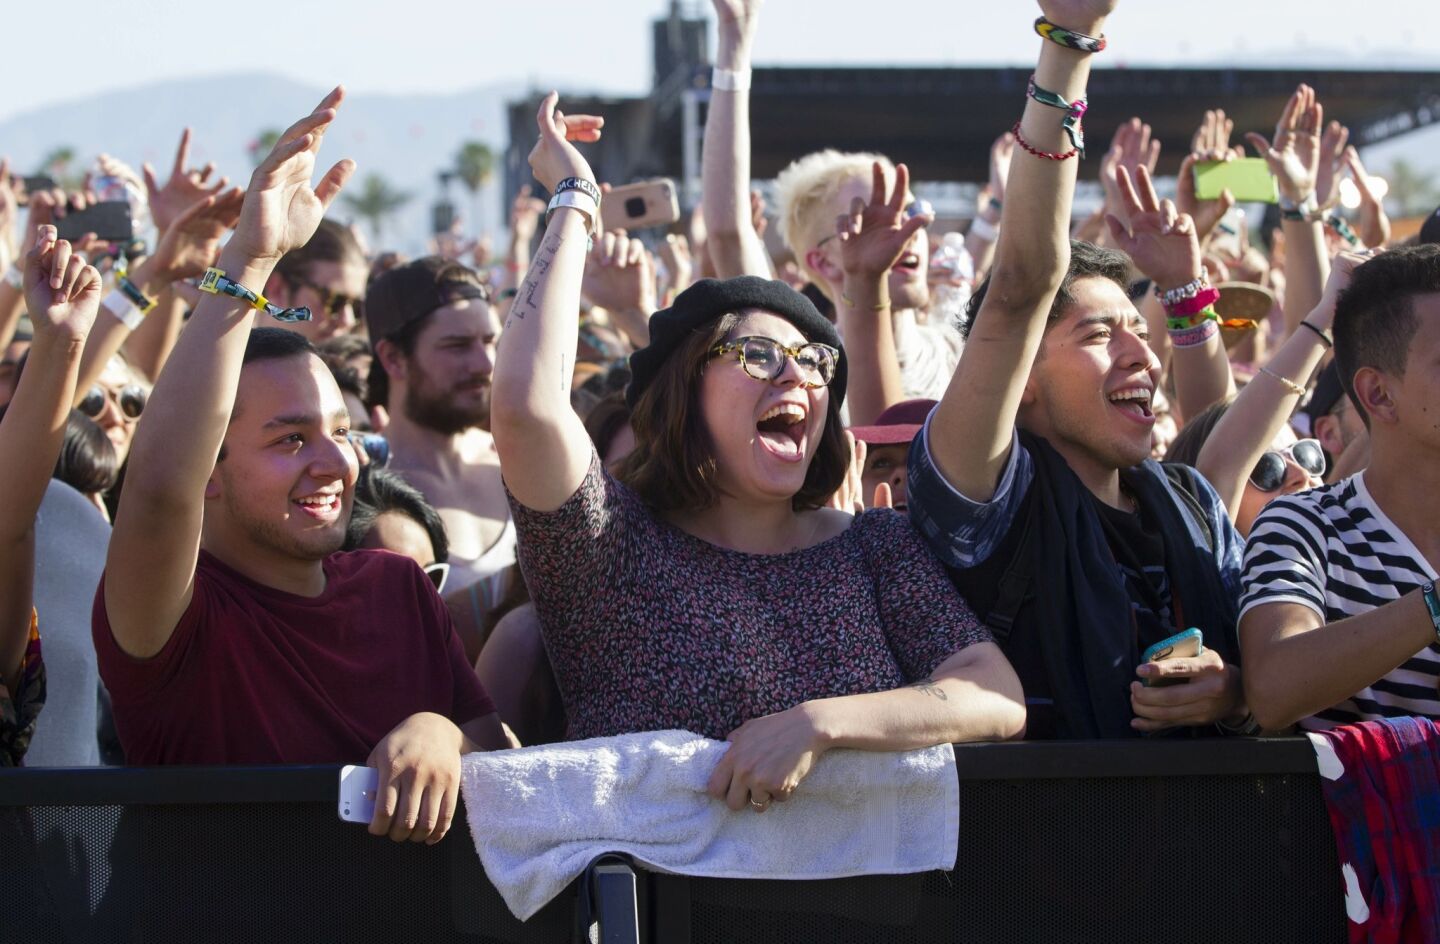 The 2015 Coachella Valley Music and Arts Festival gets underway. Fans go wild during the .Azealia Banks set on the Coachella Stage Friday.